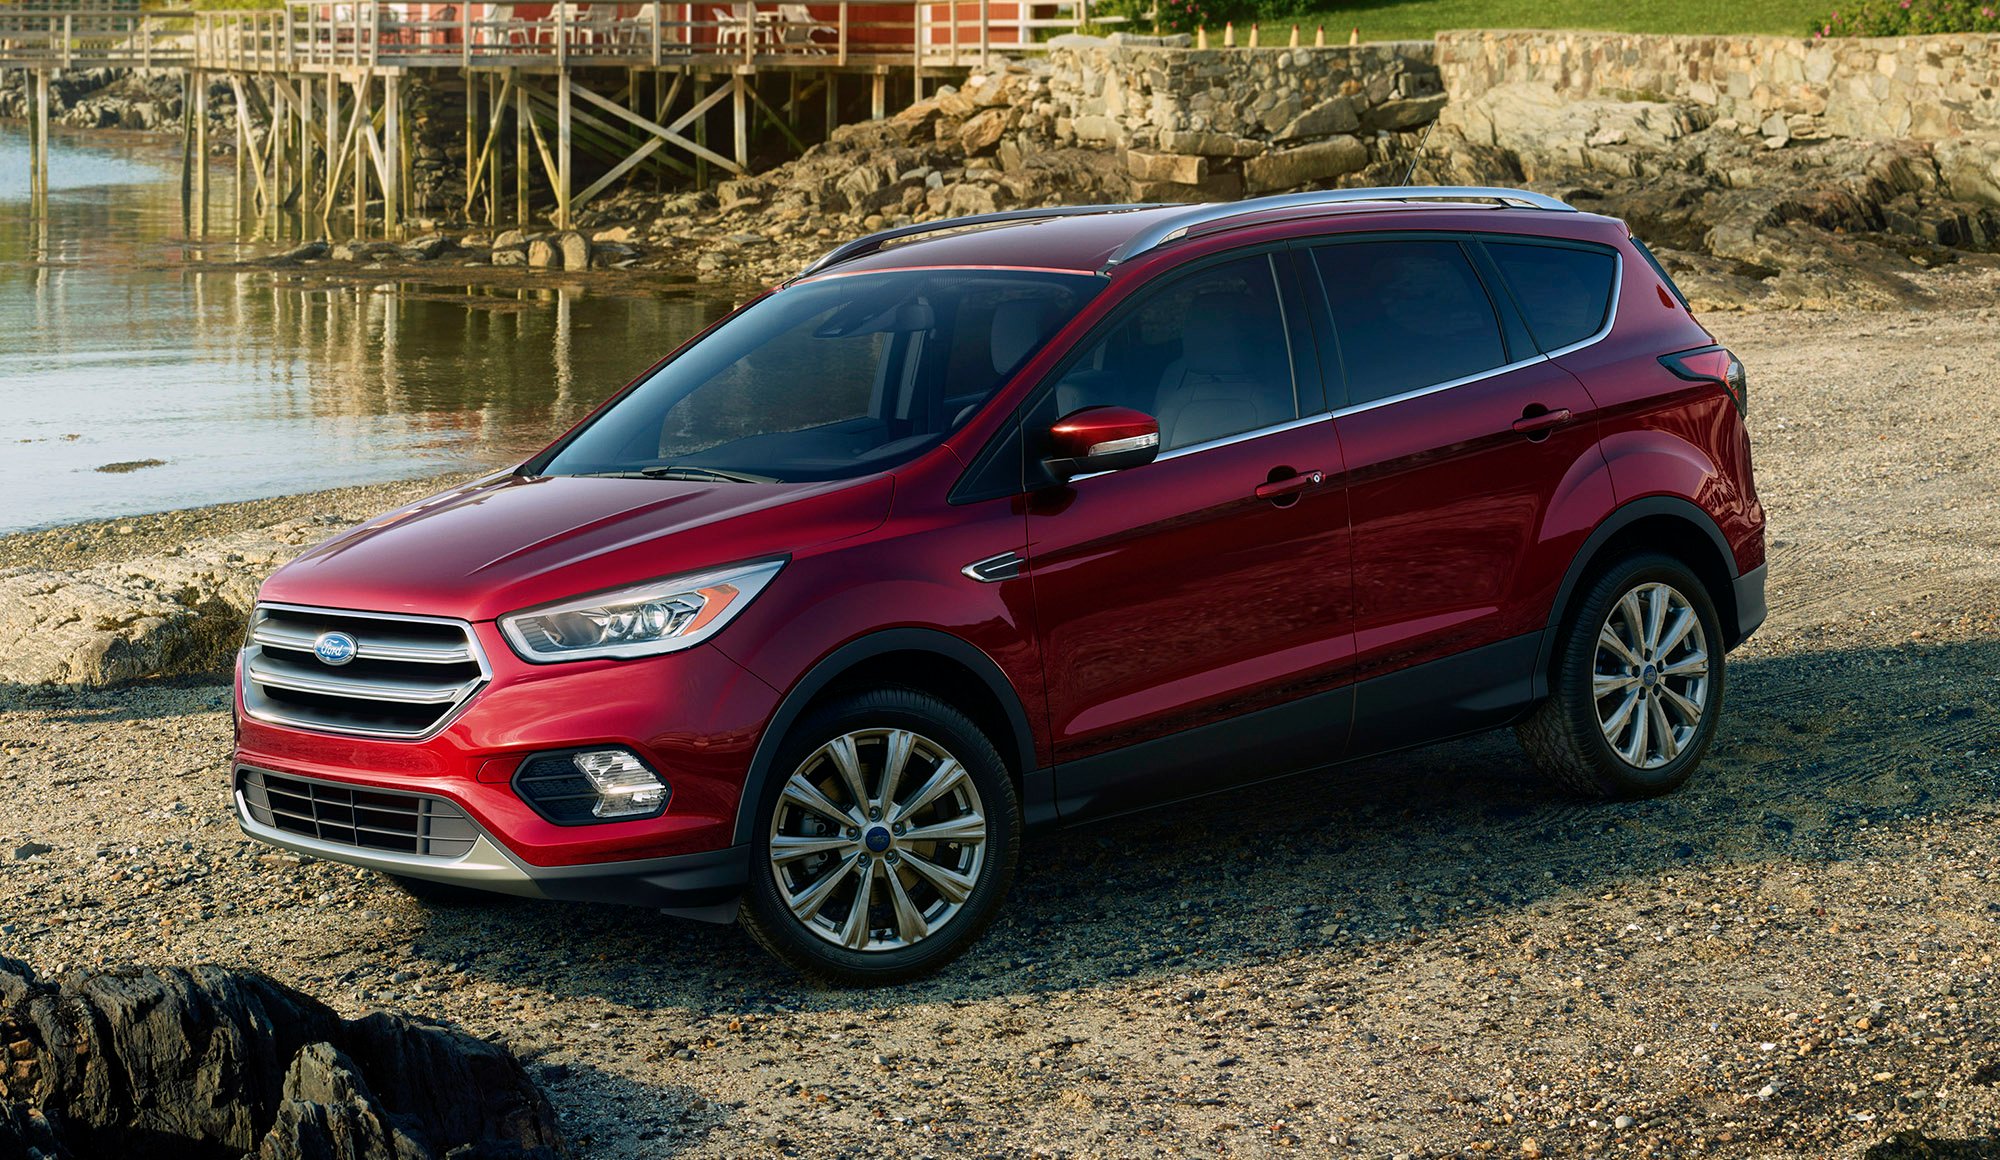 2017 Ford Kuga revealed as facelifted Escape New looks